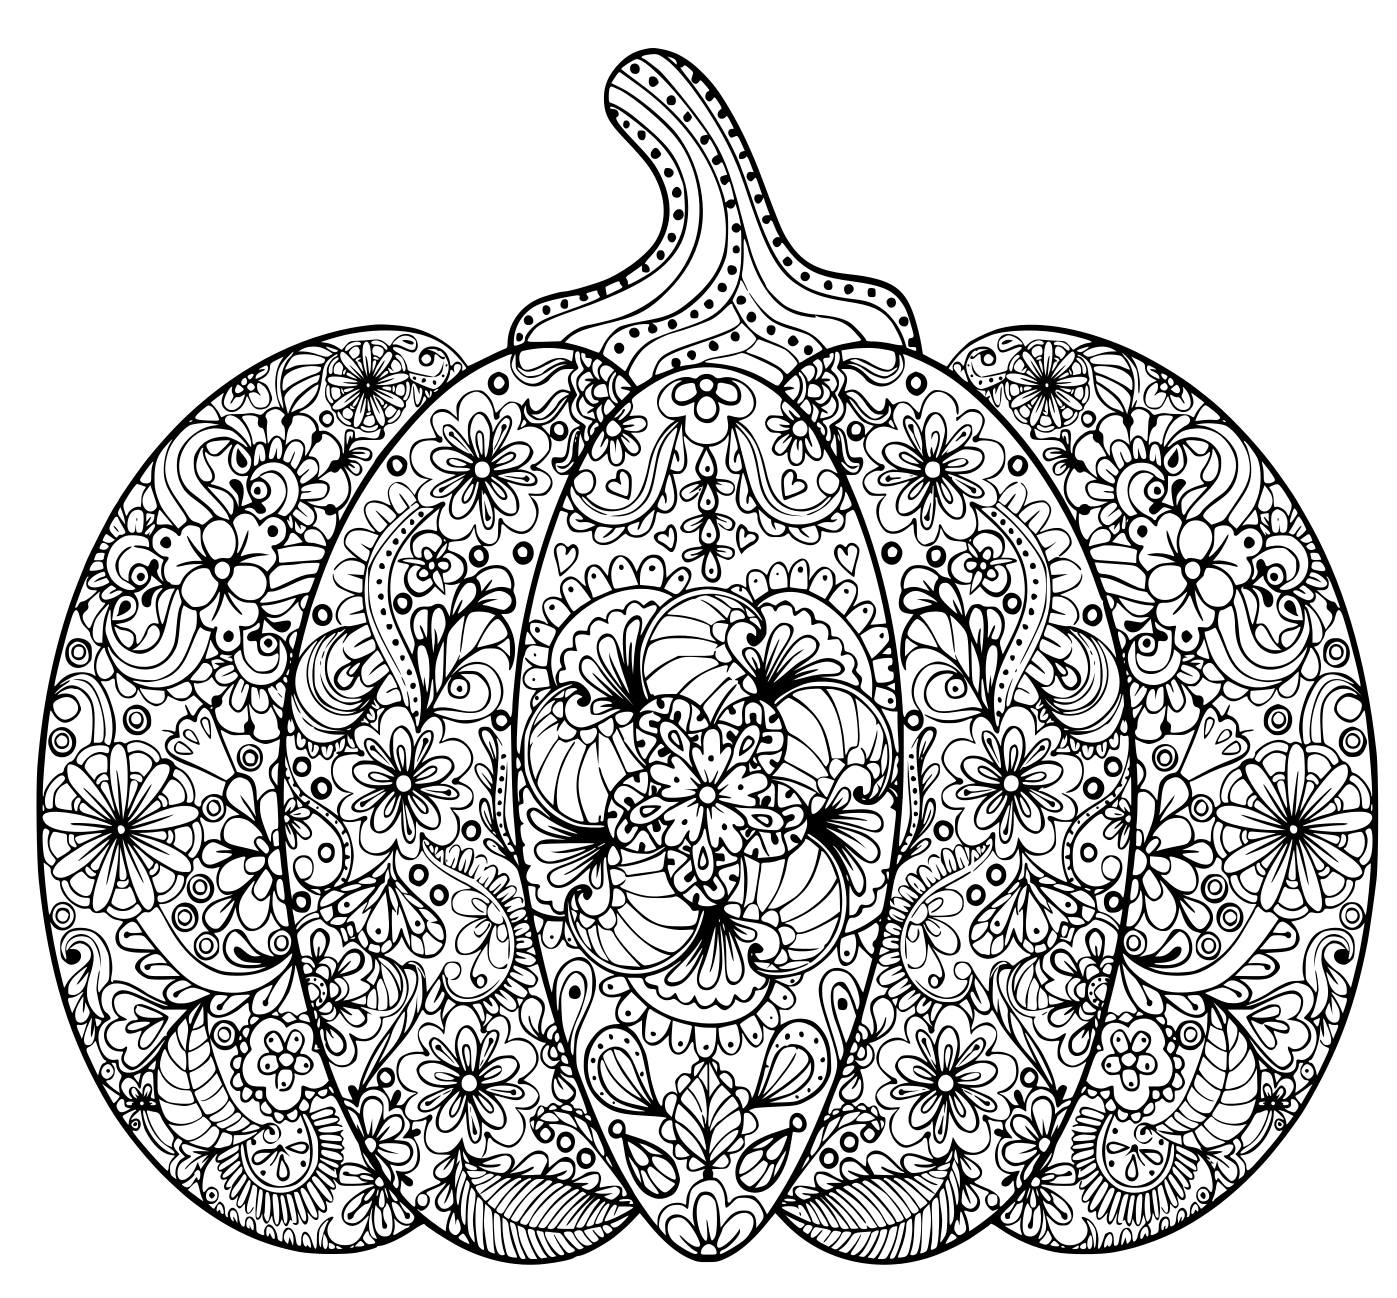 Pumpkin Illustration Hand Drawn Vegetable In Zentangle Style Tribal Totem For Tattoo Adult